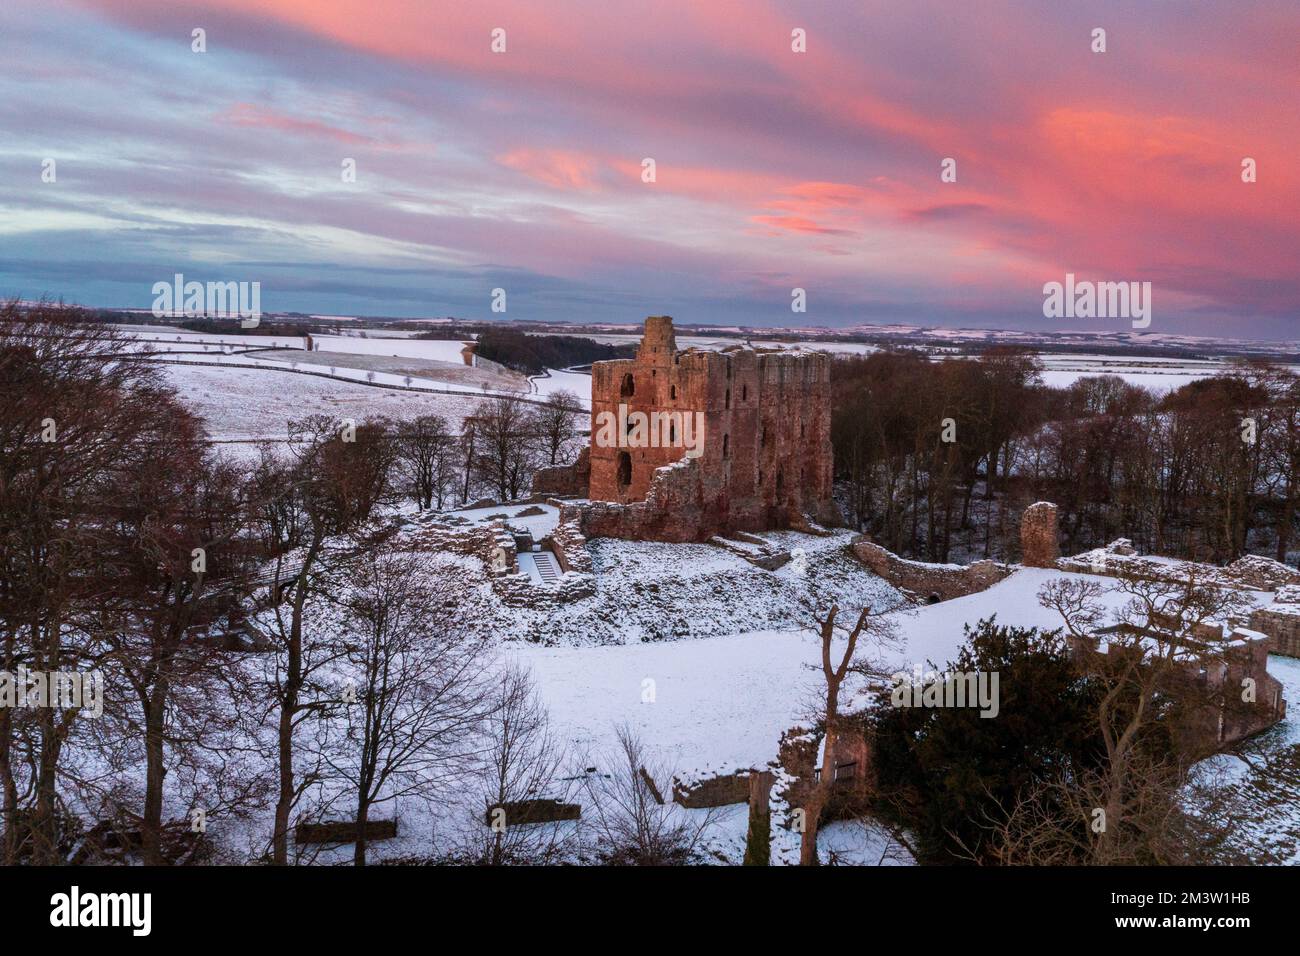 Norham Castle guarding the Scottish border high above the River Tweed as the sunsets over a winter landscape. Norham, Northumberland, England, UK Stock Photo